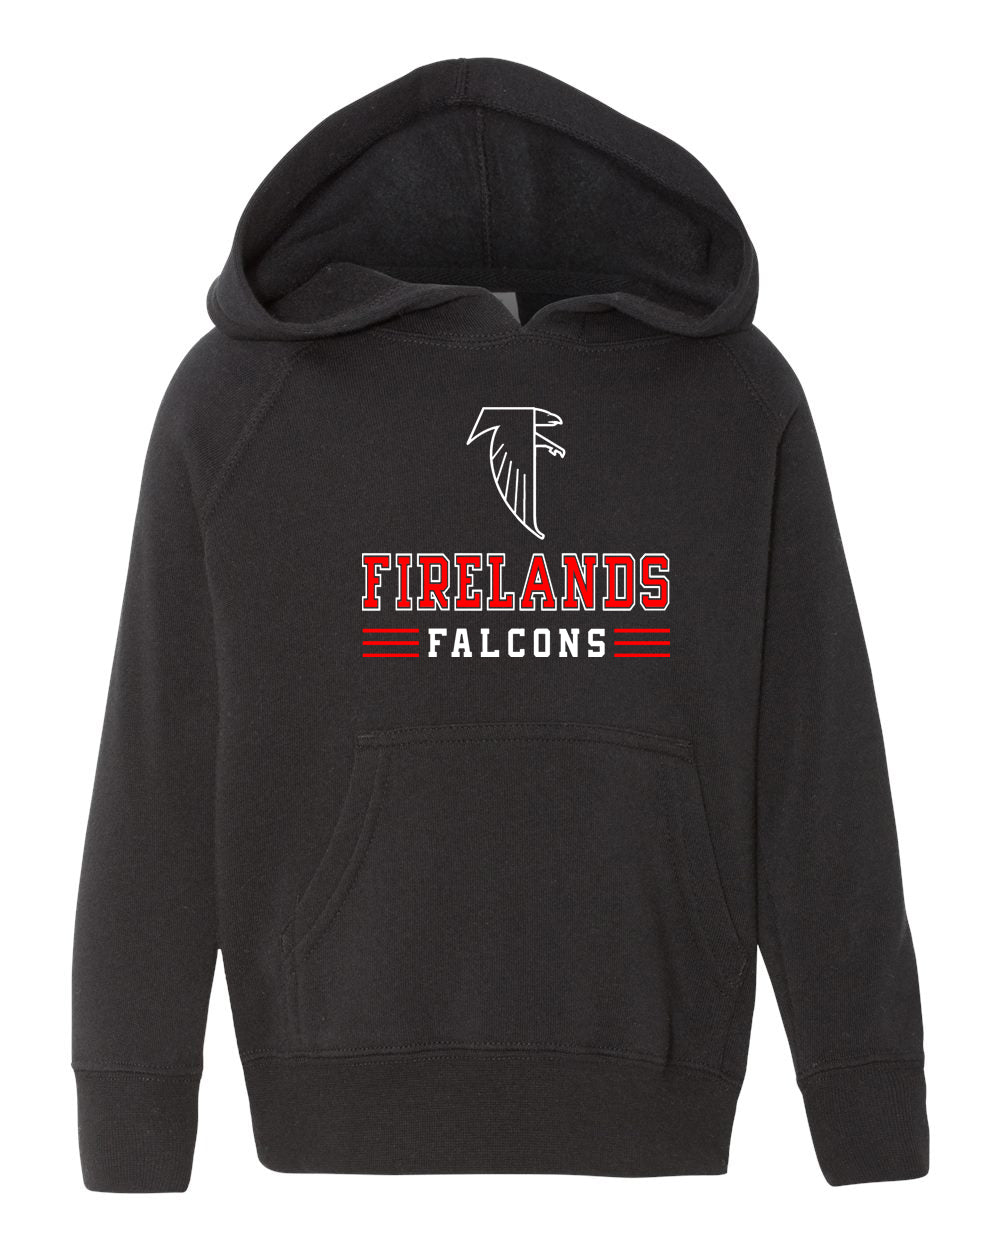 Toddler - Firelands Falcons - Hoodie - Mistakes on the Lake